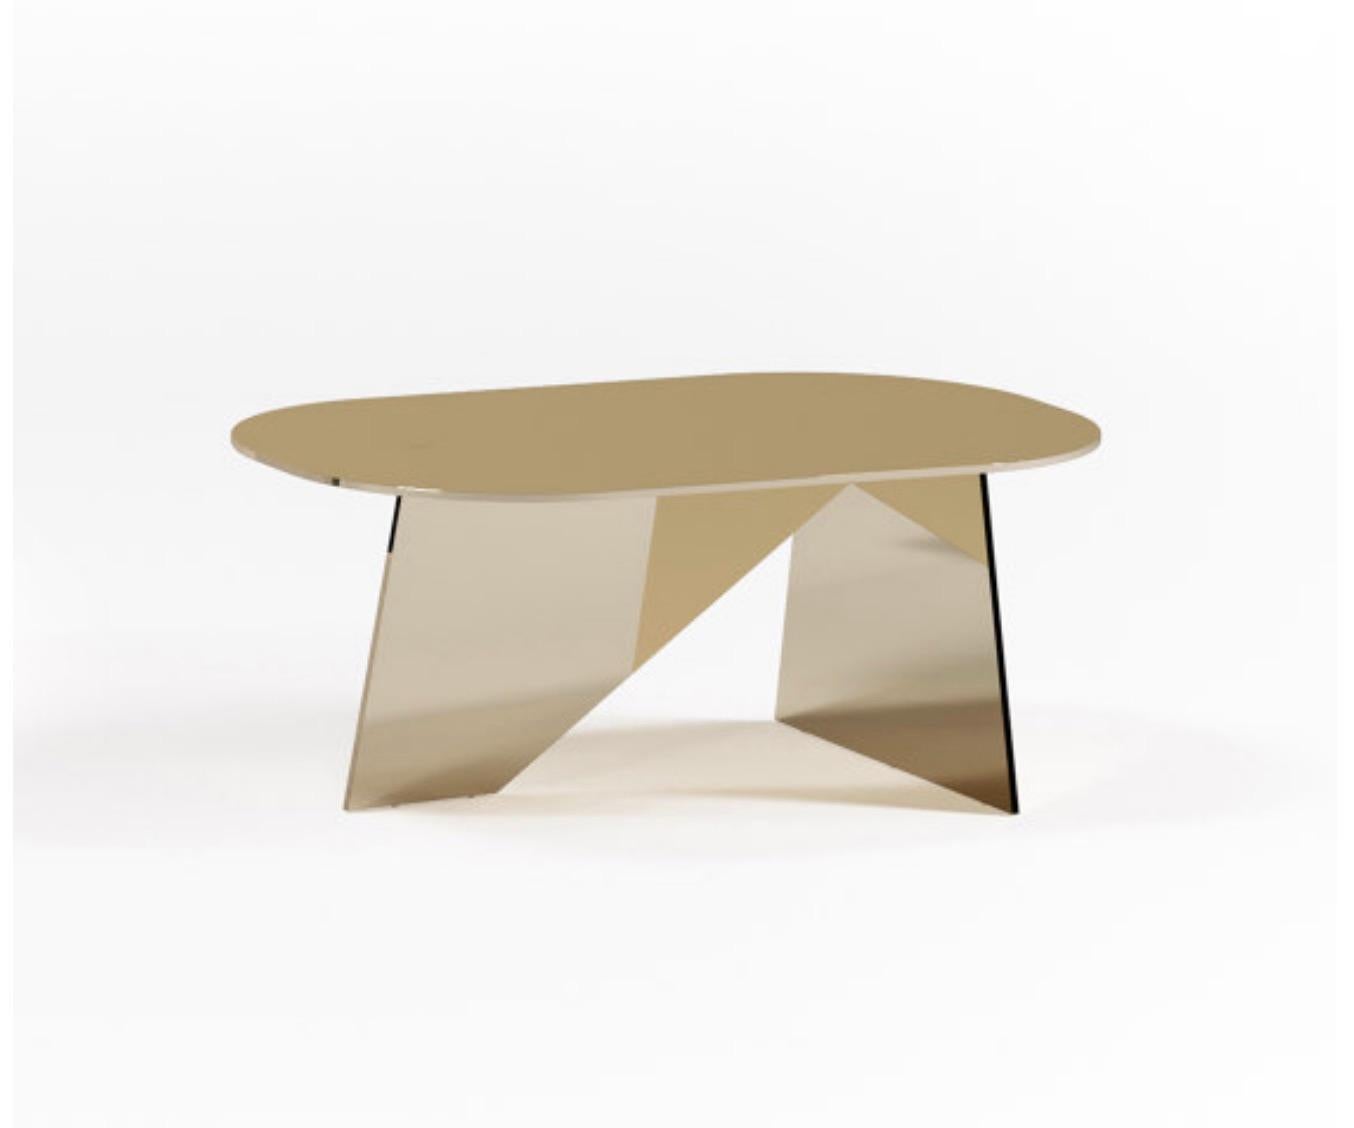 Crafted with meticulous attention to detail, this coffee table is artfully composed of three individual metal sheets, each measuring a substantial 8mm in thickness. These sheets are thoughtfully positioned in an interlocking configuration, creating